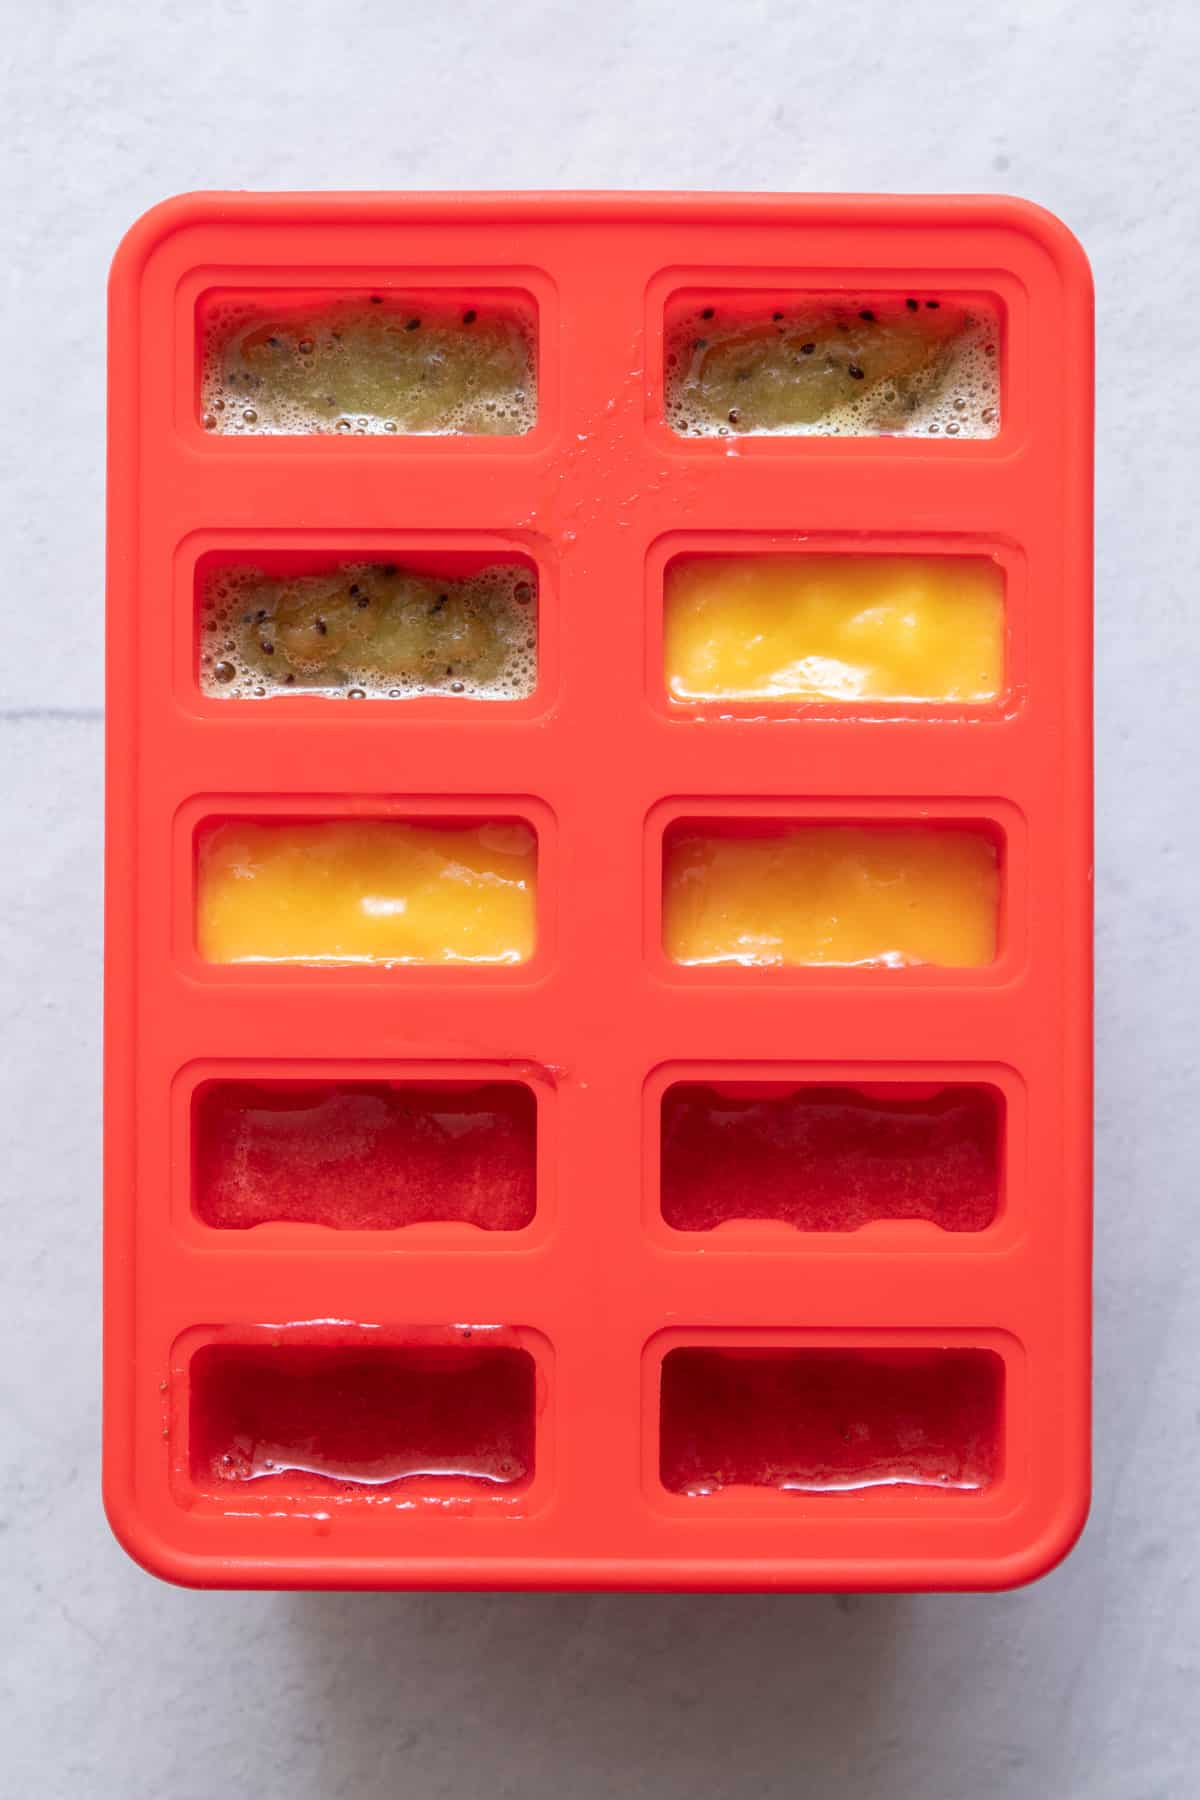 Popsicle freezer tray with 3 different flavors poured inside.